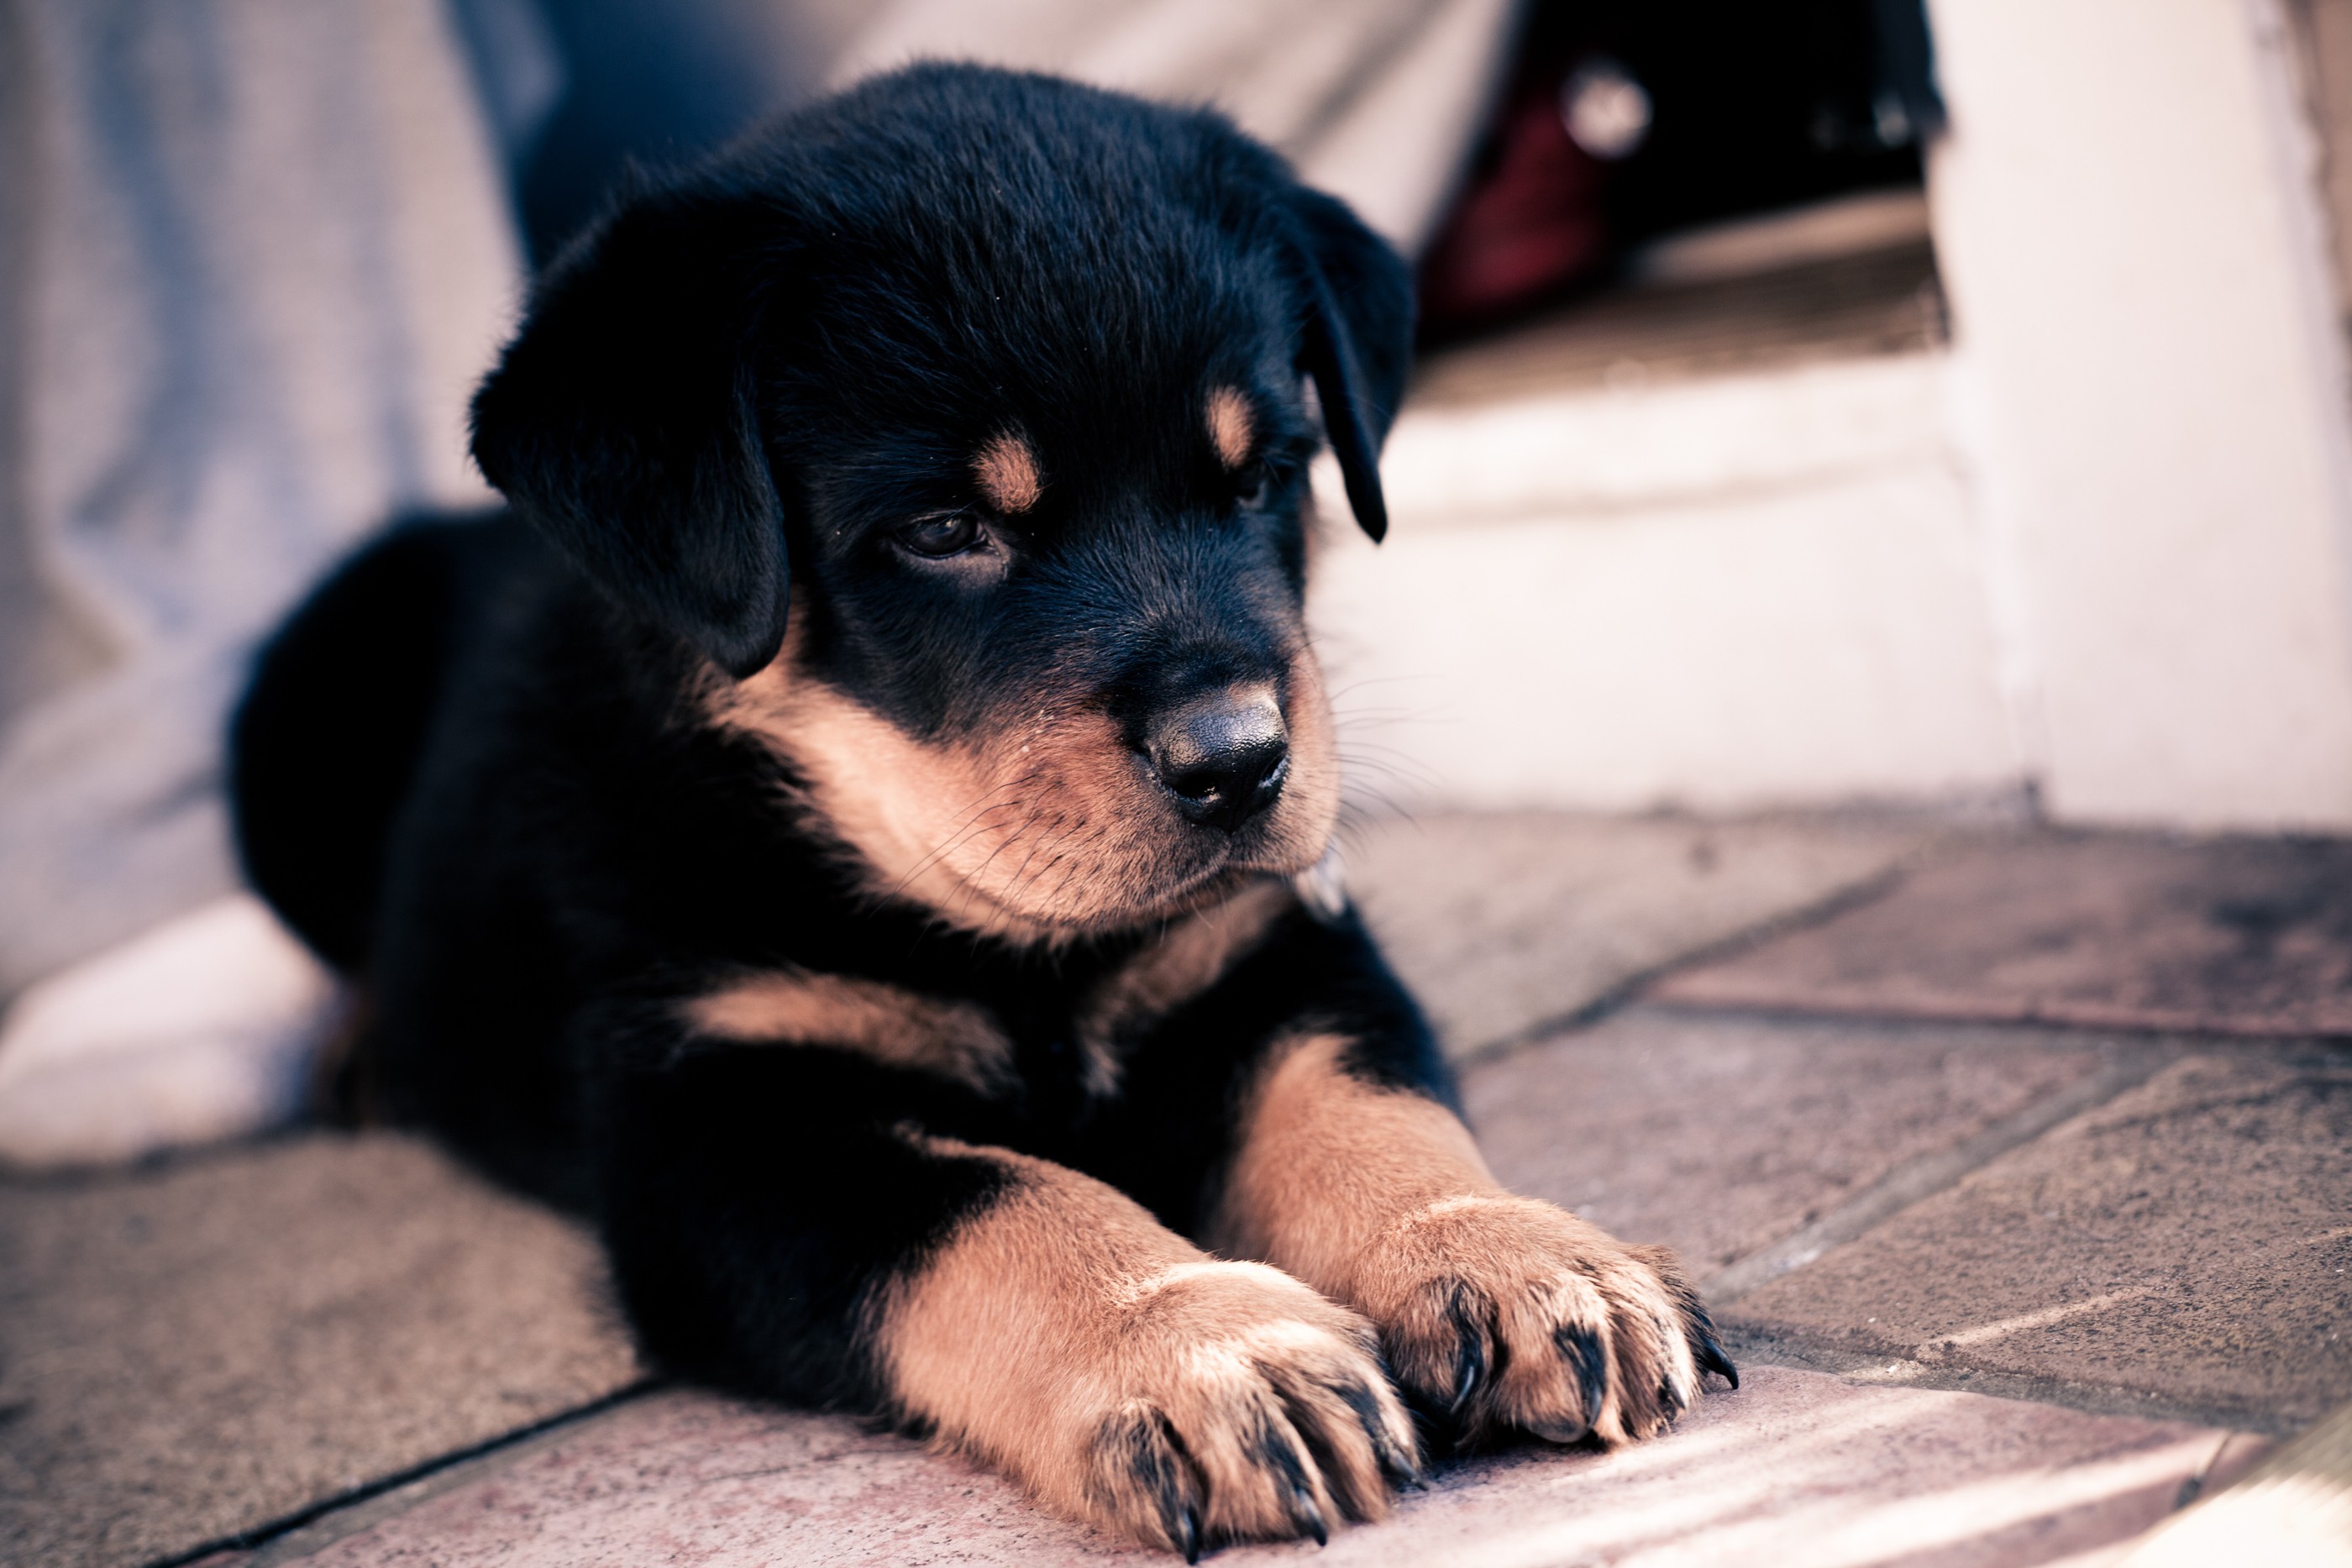 muzzle, animals, dog, puppy, paws, rottweiler High Definition image